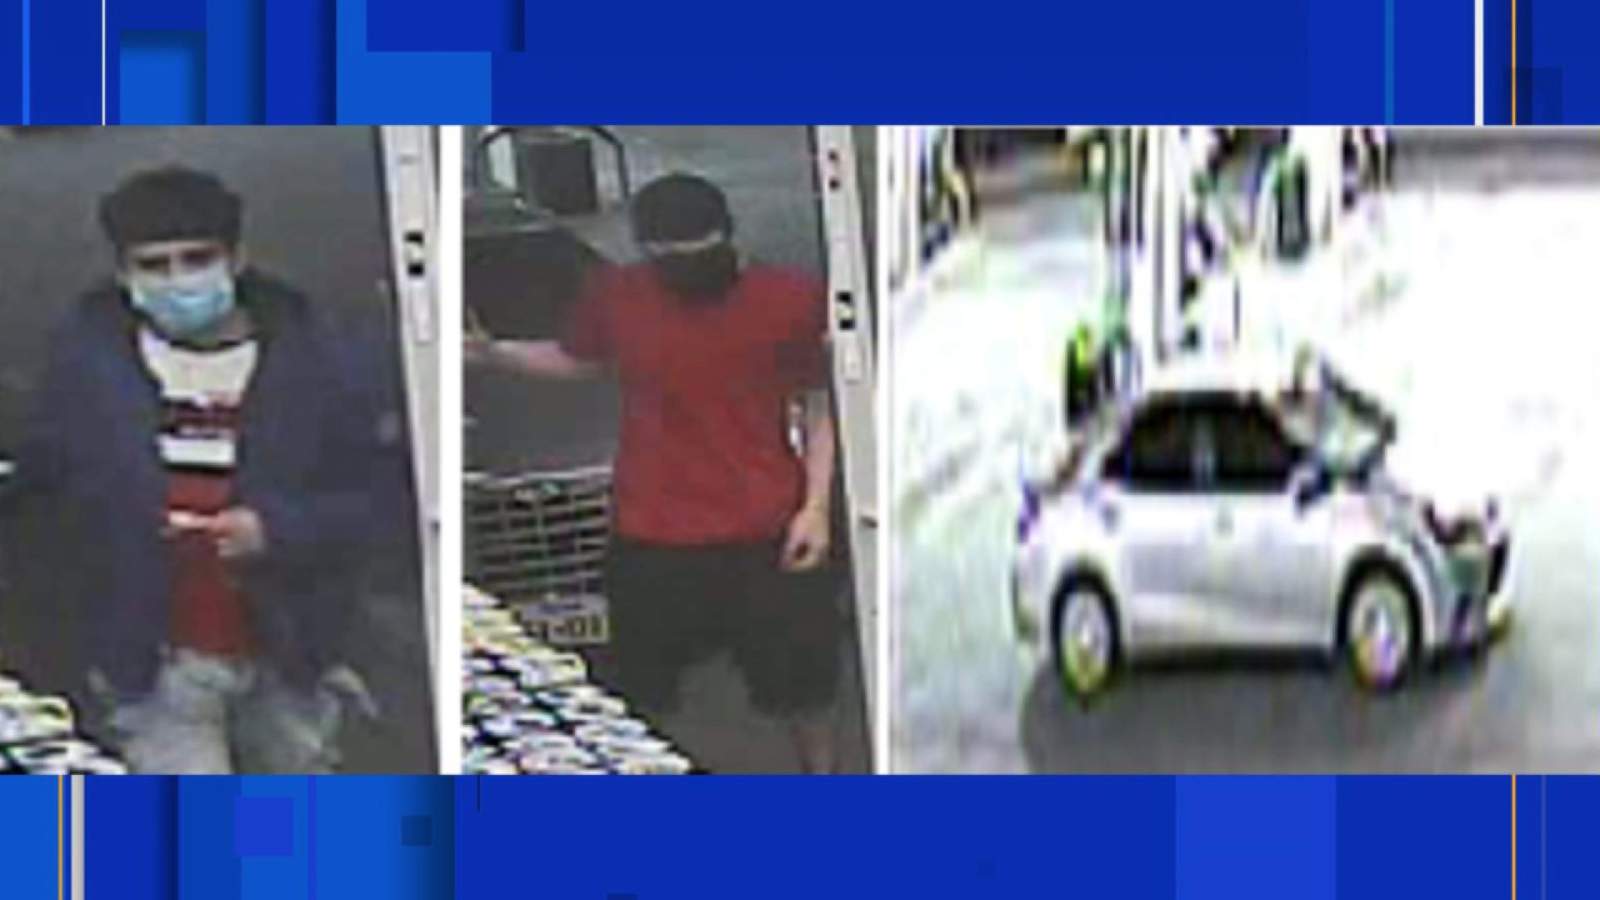 2 sought in armed robbery of San Antonio store; items stolen from shoppers, employees